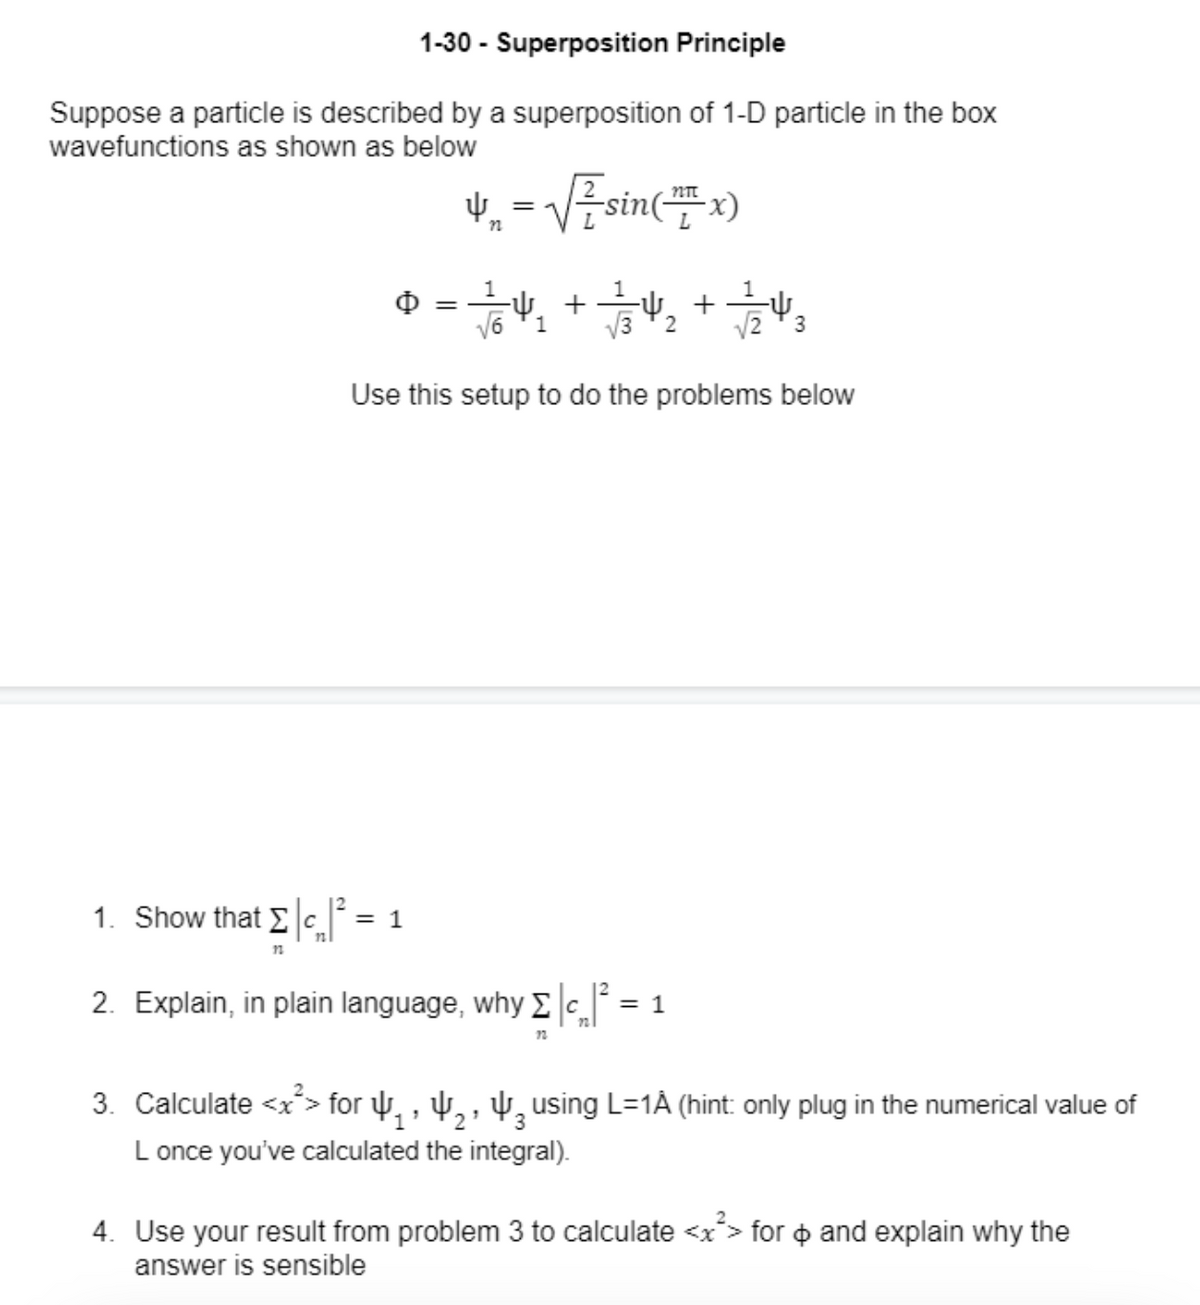 1-30 - Superposition Principle
Suppose a particle is described by a superposition of 1-D particle in the box
wavefunctions as shown as below
1. Show that Σc|²
12
4₁ = √√ ² sin(x)
n
0 = 1/64
с = 1
-4₁
√6 1
Use this setup to do the problems below
+
7/24/2+1/2/24/3
√32
√23
2. Explain, in plain language, why
Σ c
| Σ |c₂|² = ¤ 1
22
3. Calculate <x> for ₁, ₂, ³ using L=1Â (hint: only plug in the numerical value of
L once you've calculated the integral).
4. Use your result from problem 3 to calculate <x²> for > and explain why the
answer is sensible